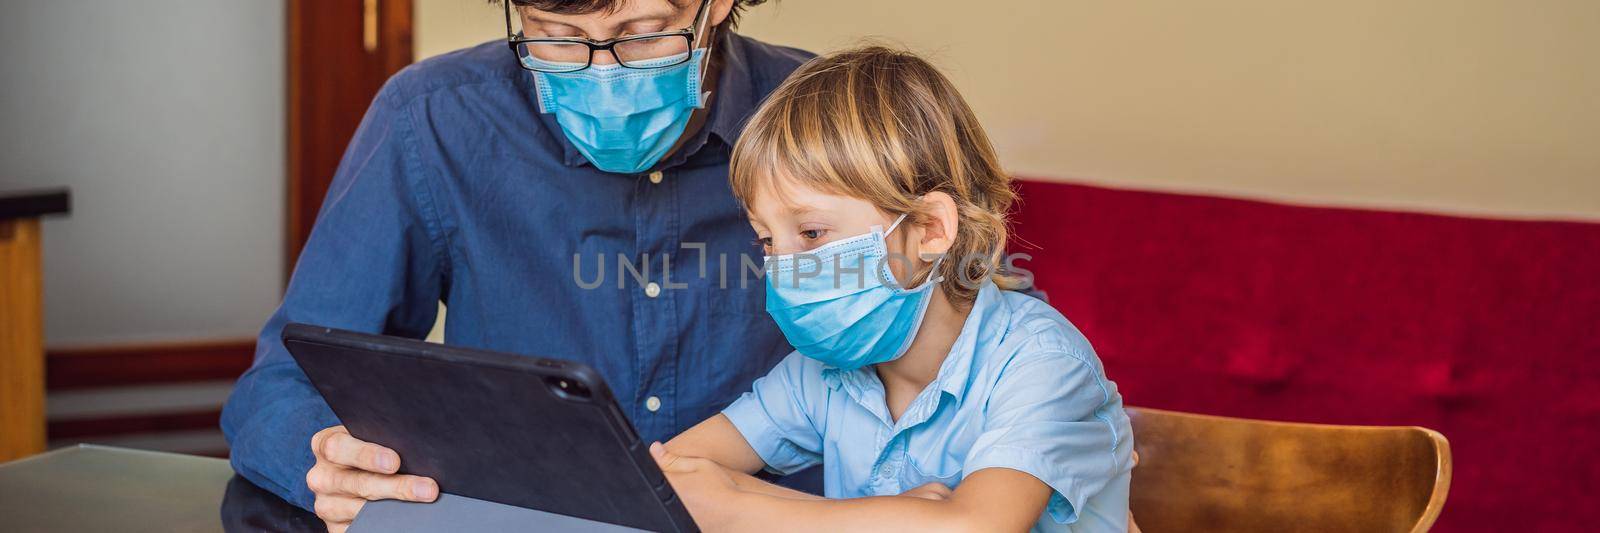 Boy studying online at home using a tablet. Father helps him learn. Father and son in medical masks to protect against coronovirus. Studying during quarantine. Global pandemic covid19 virus BANNER, LONG FORMAT by galitskaya